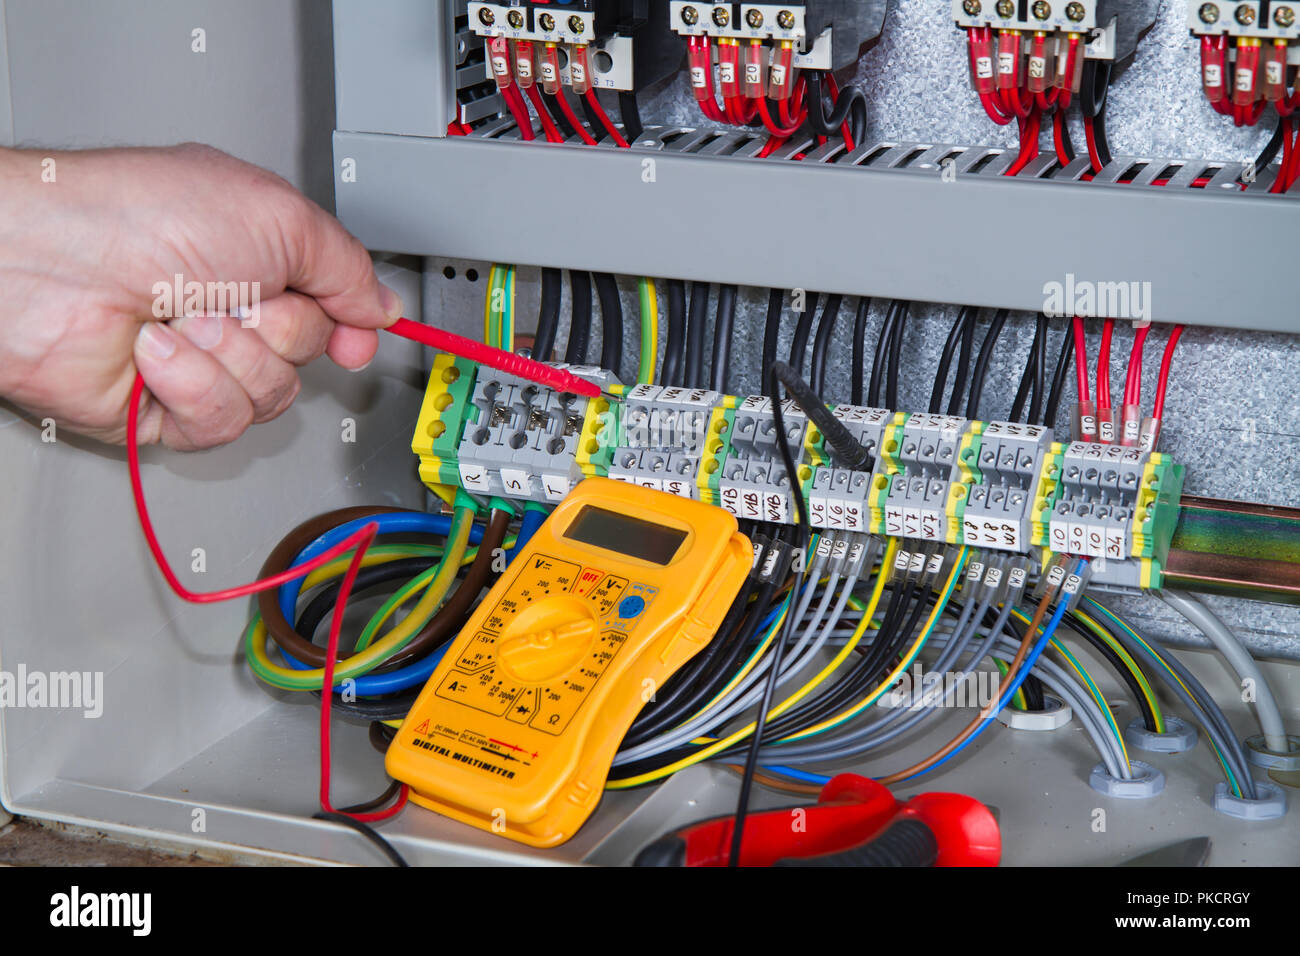 electrician at work with an electric panel Stock Photo